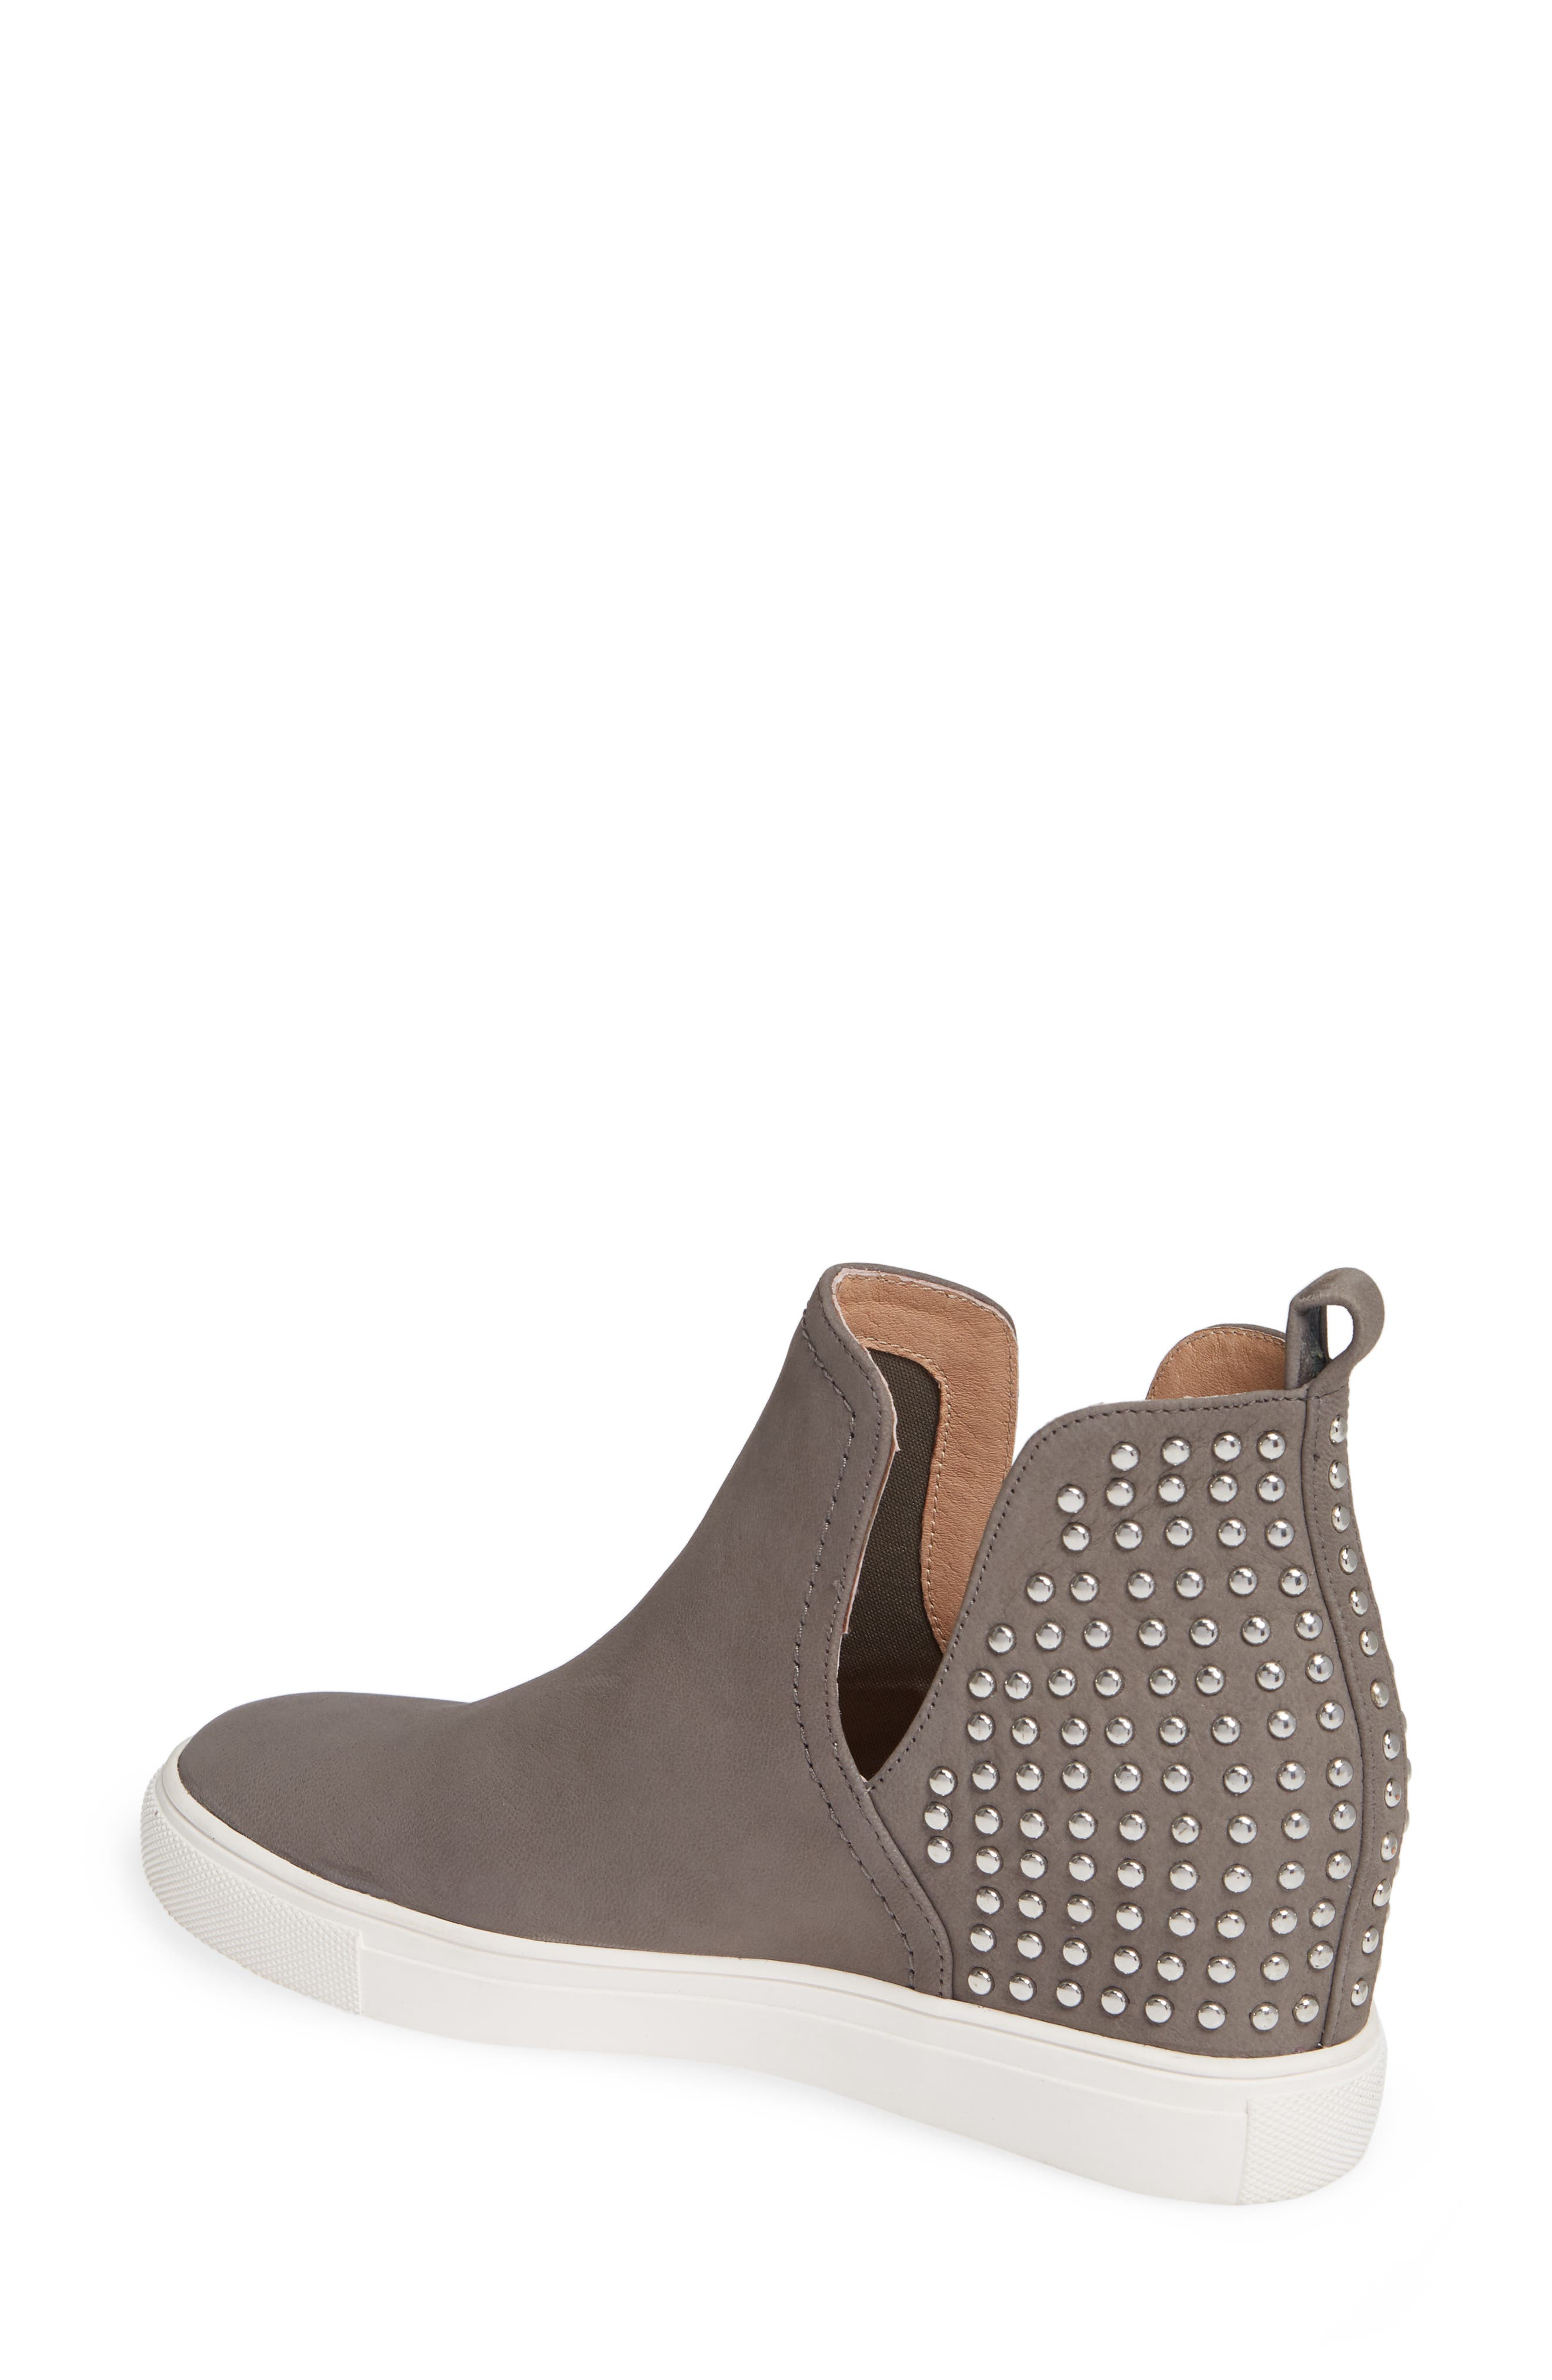 steve madden coin wedge sneakers